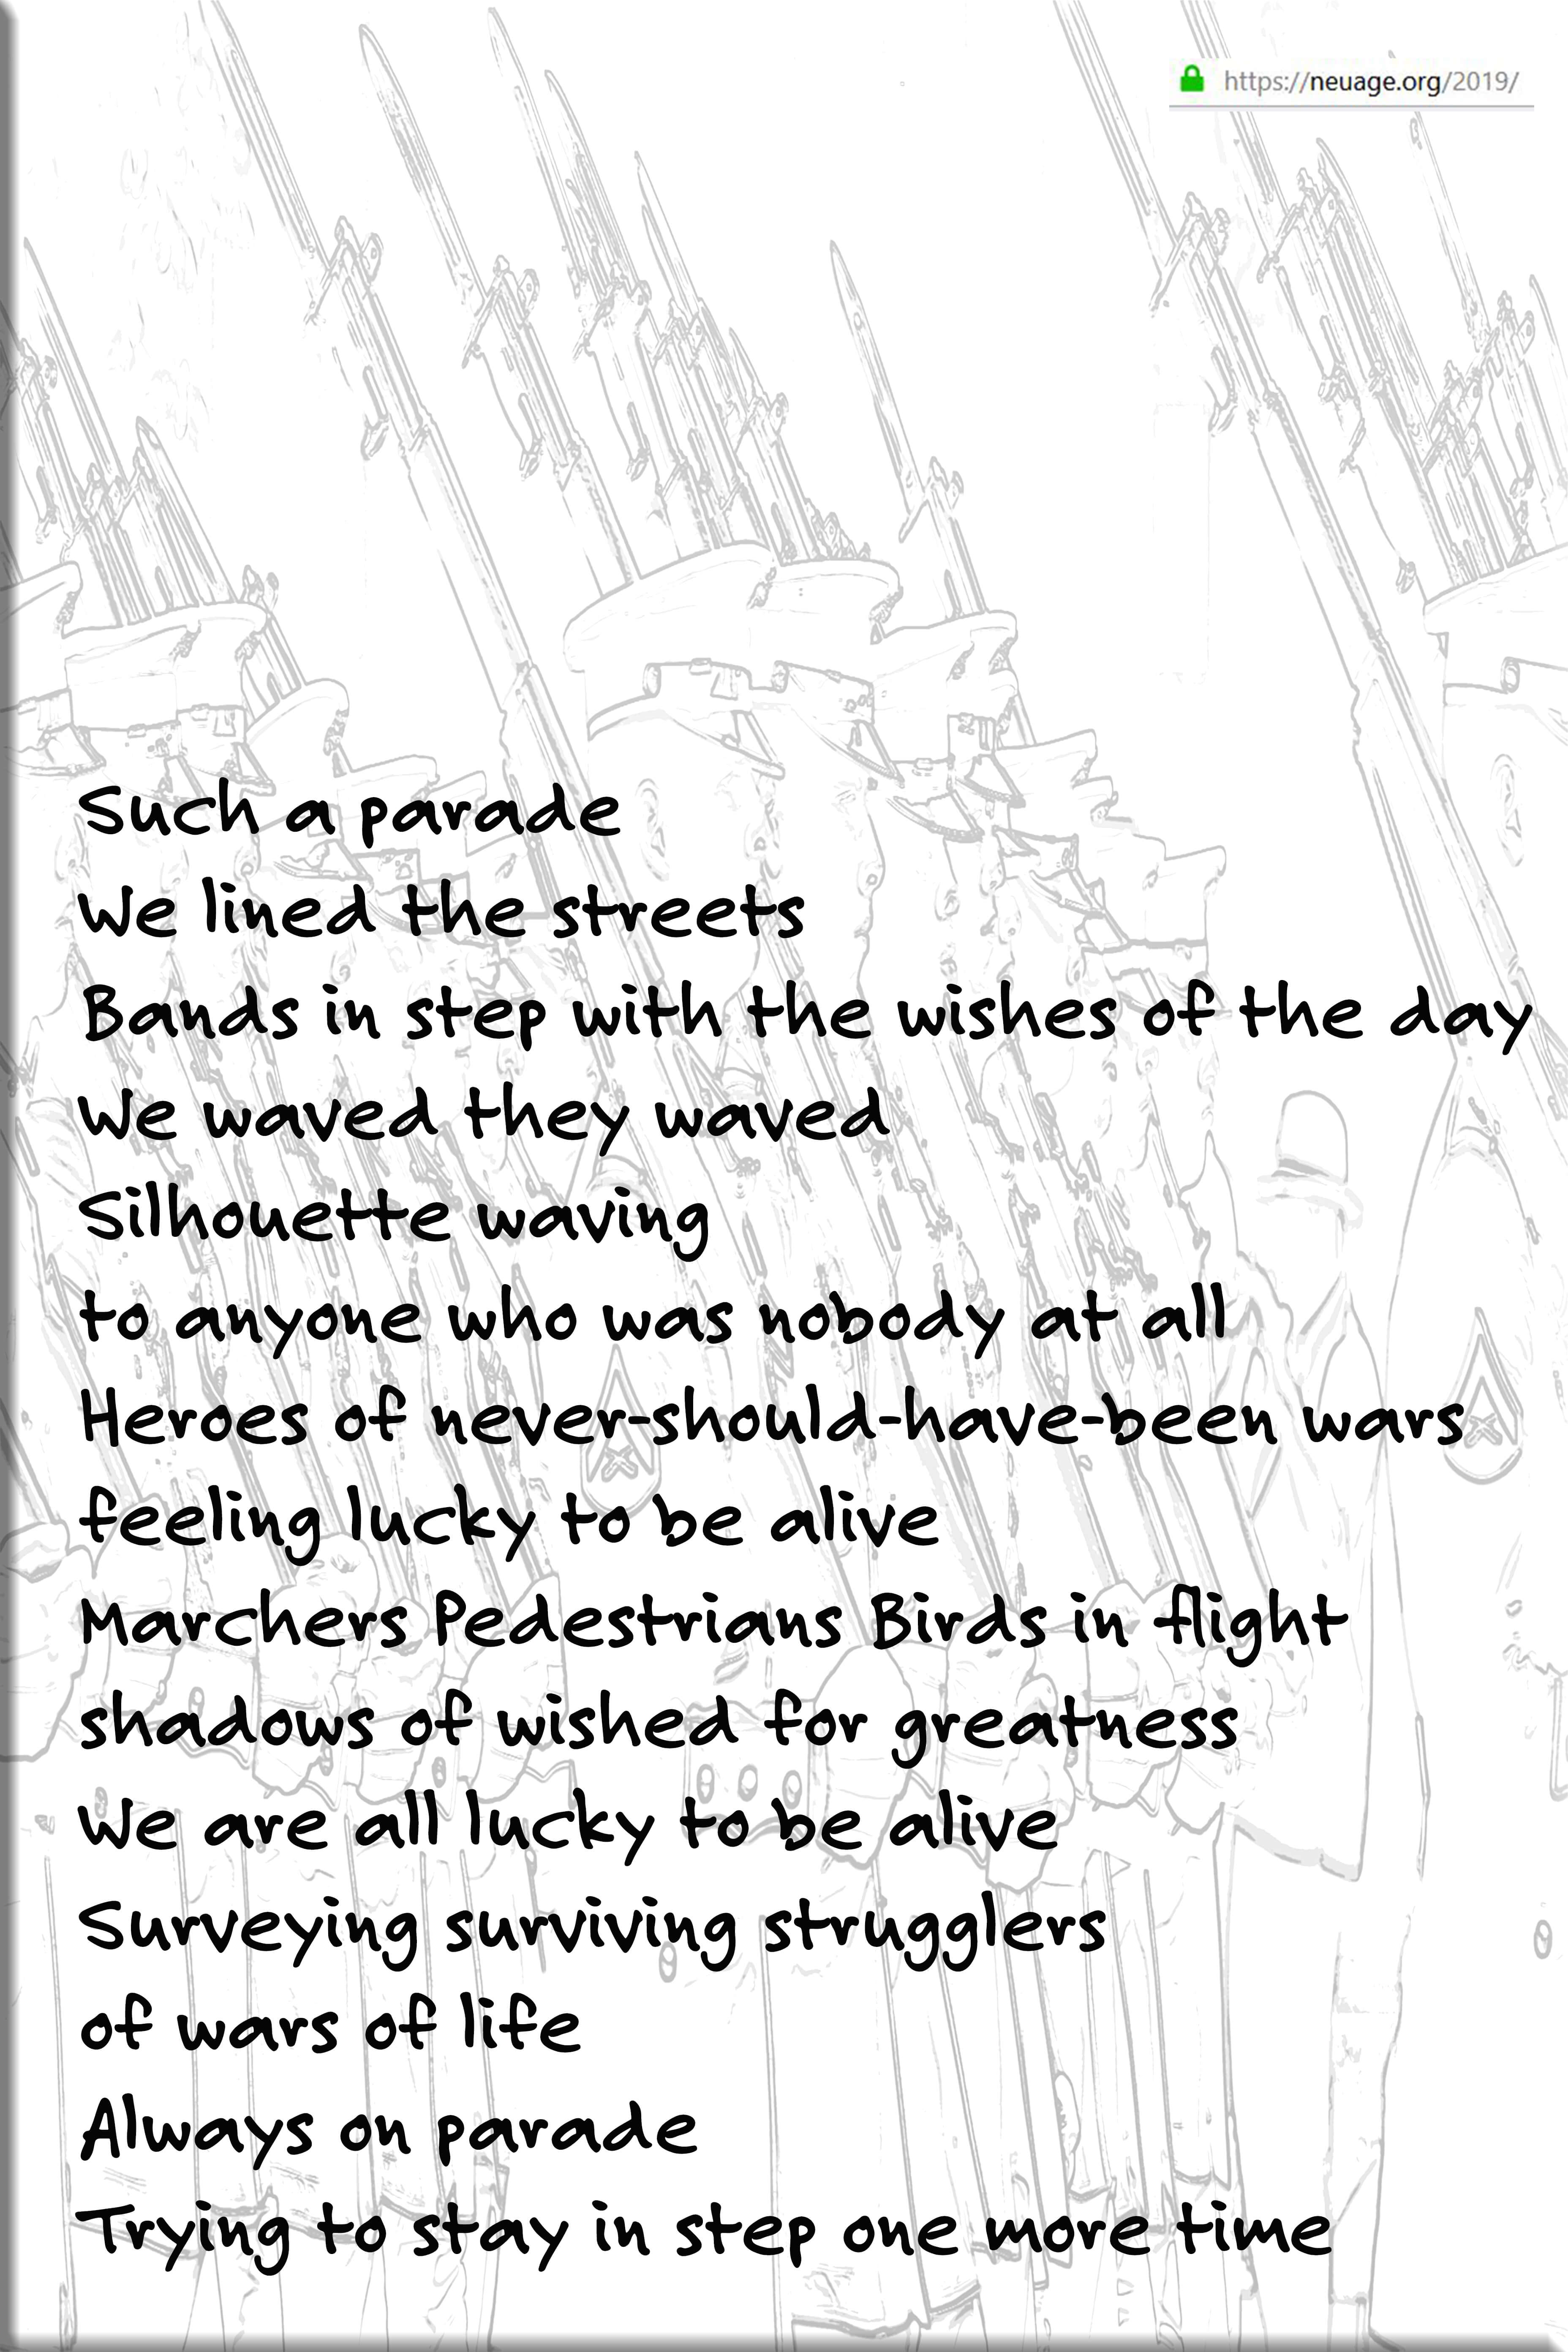 Such a parade
We lined the streets
Bands in step with the wishes of the day
We waved they waved
Silhouette waving
to anyone who was nobody at all
Heroes of never-should-have-been wars
feeling lucky to be alive 
Marchers Pedestrians Birds in flight
shadows of wished for greatness
We are all lucky to be alive
Surveying surviving strugglers
of wars of life
Always on parade
Trying to stay in step one more time
